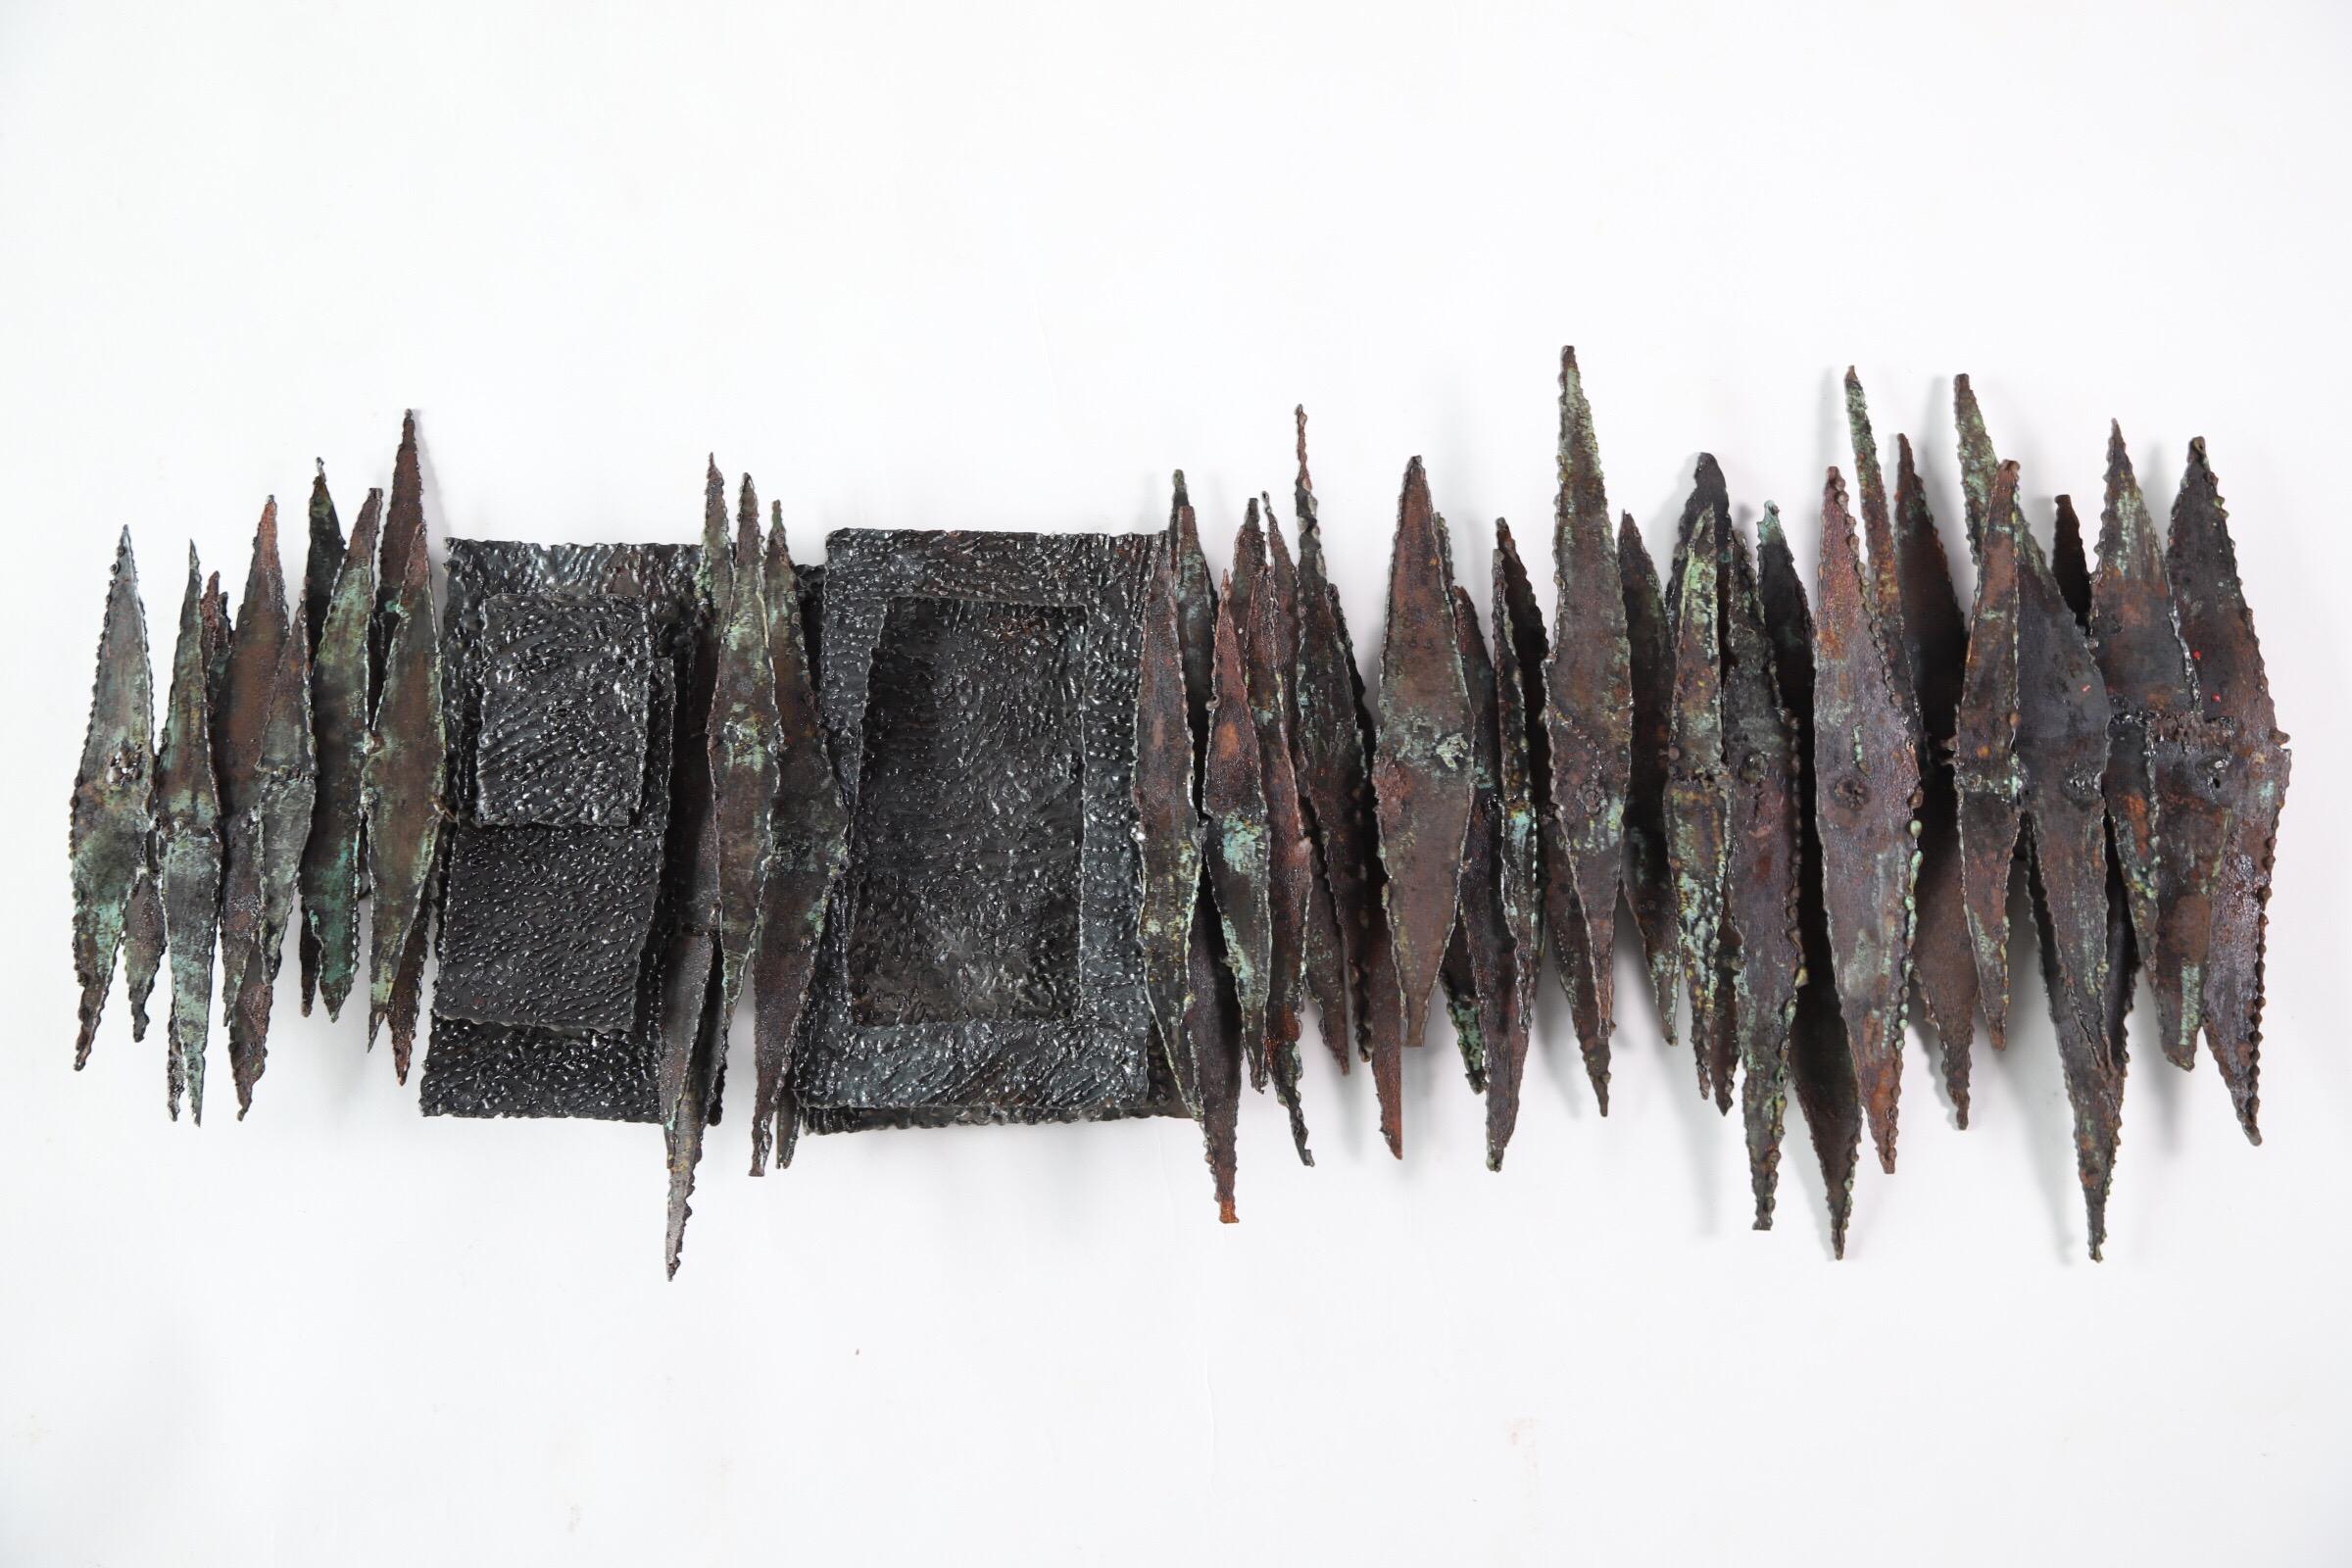 Extraordinary vintage Brutalist steel wall sculpture. Consisting of soldered and welded torch cut steel. Layered to create depth and expand the endless texture. Very much in the style of Paul Evans and Silas Seandel. Can be hung vertically or